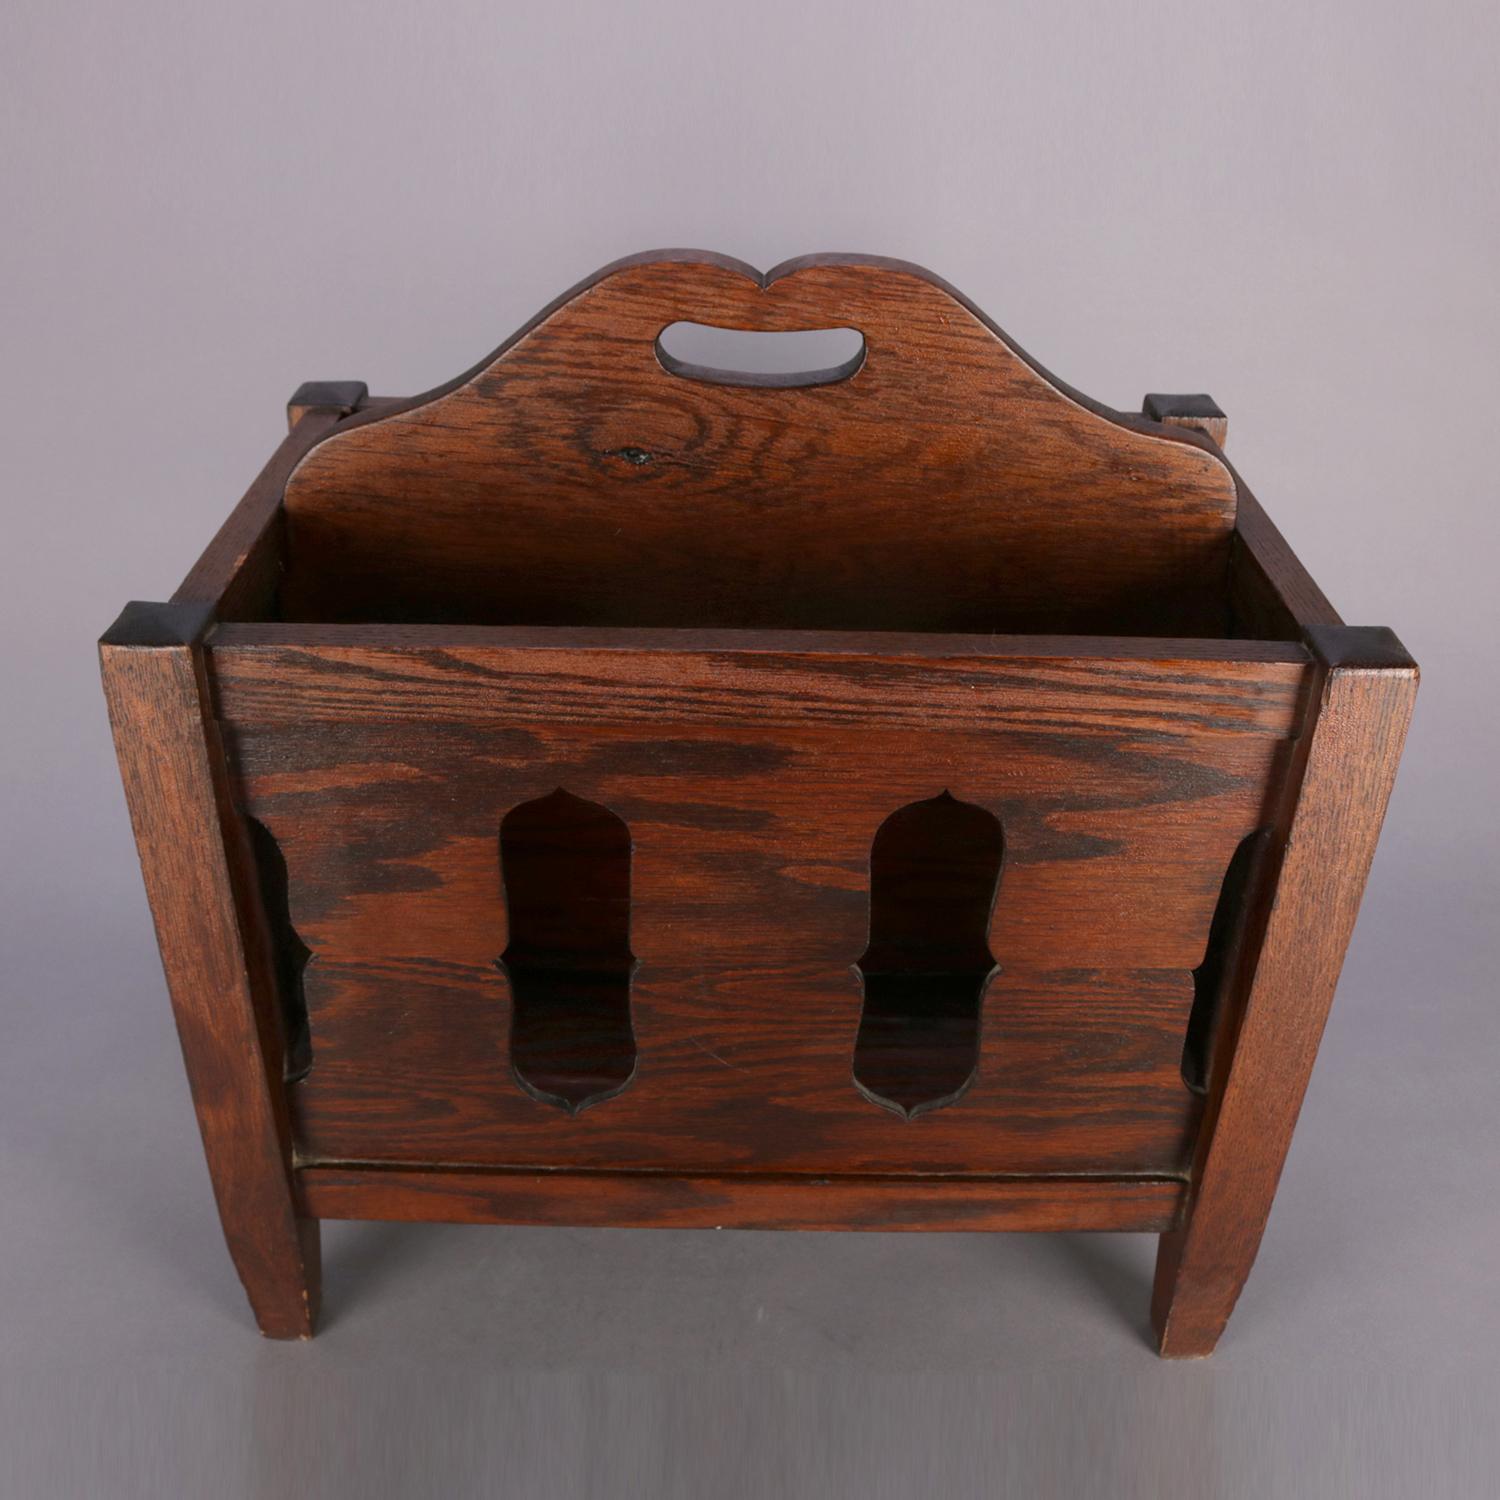 Arts & Crafts Stickley School mission oak magazine rack features quarter sawn oak construction with cut-out sides and central divider with handle, raised on square and slightly tapered legs, circa 1910.

Measures: 20